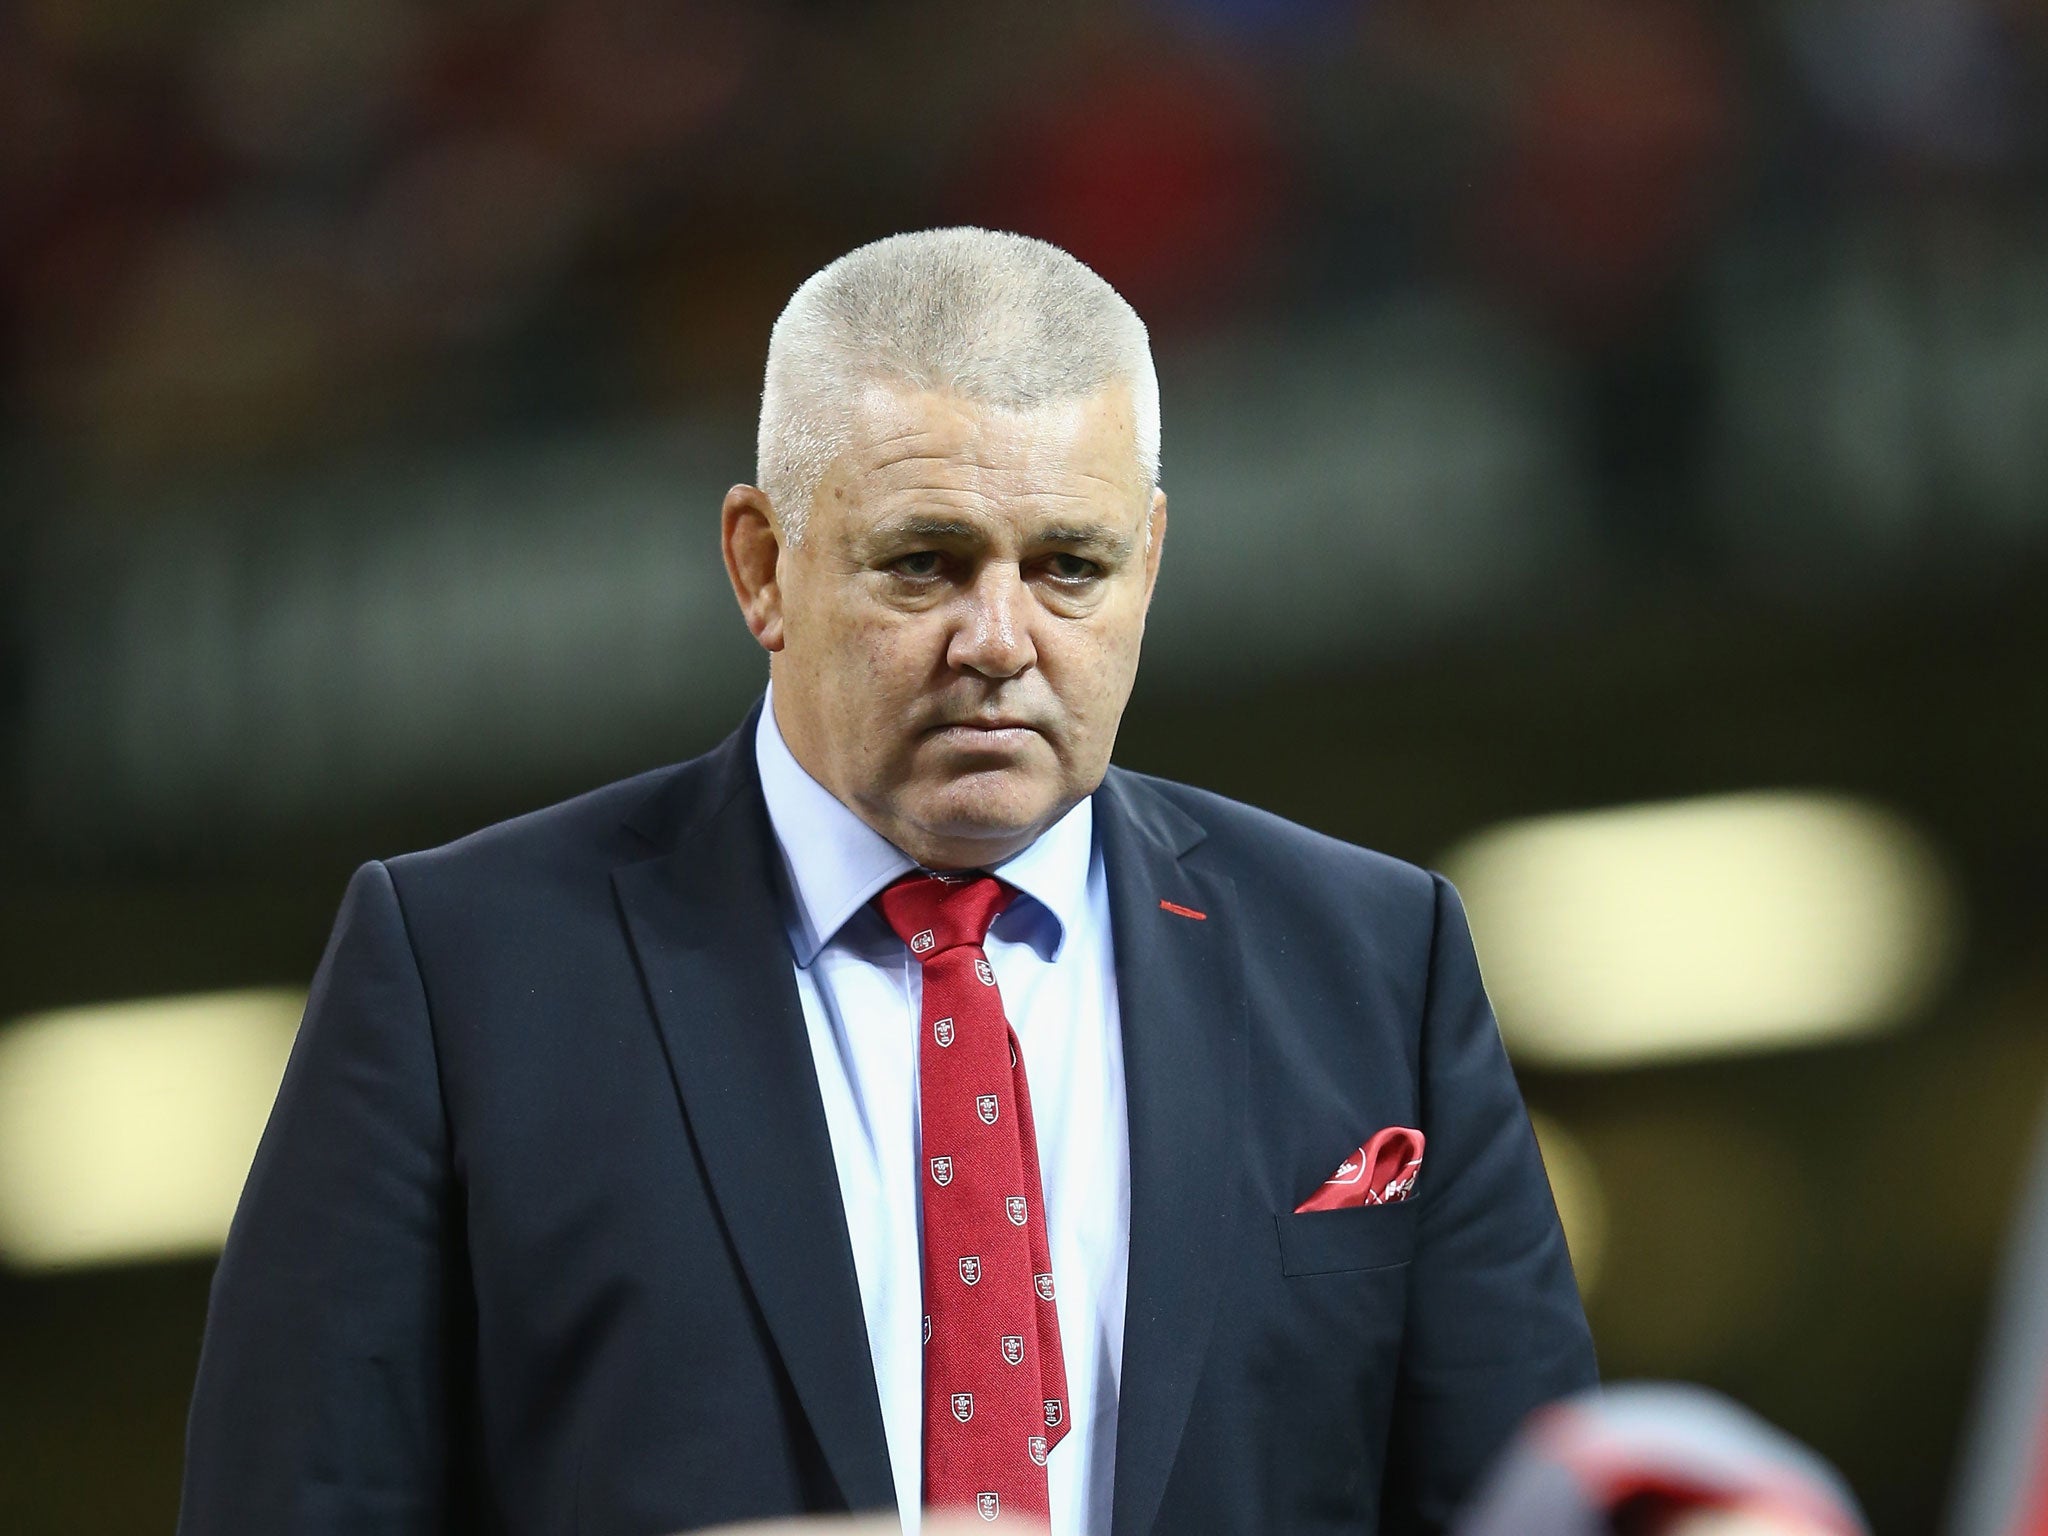 Warren Gatland has admitted that Wales face a 'massive game' when they take on France in the Six Nations next week